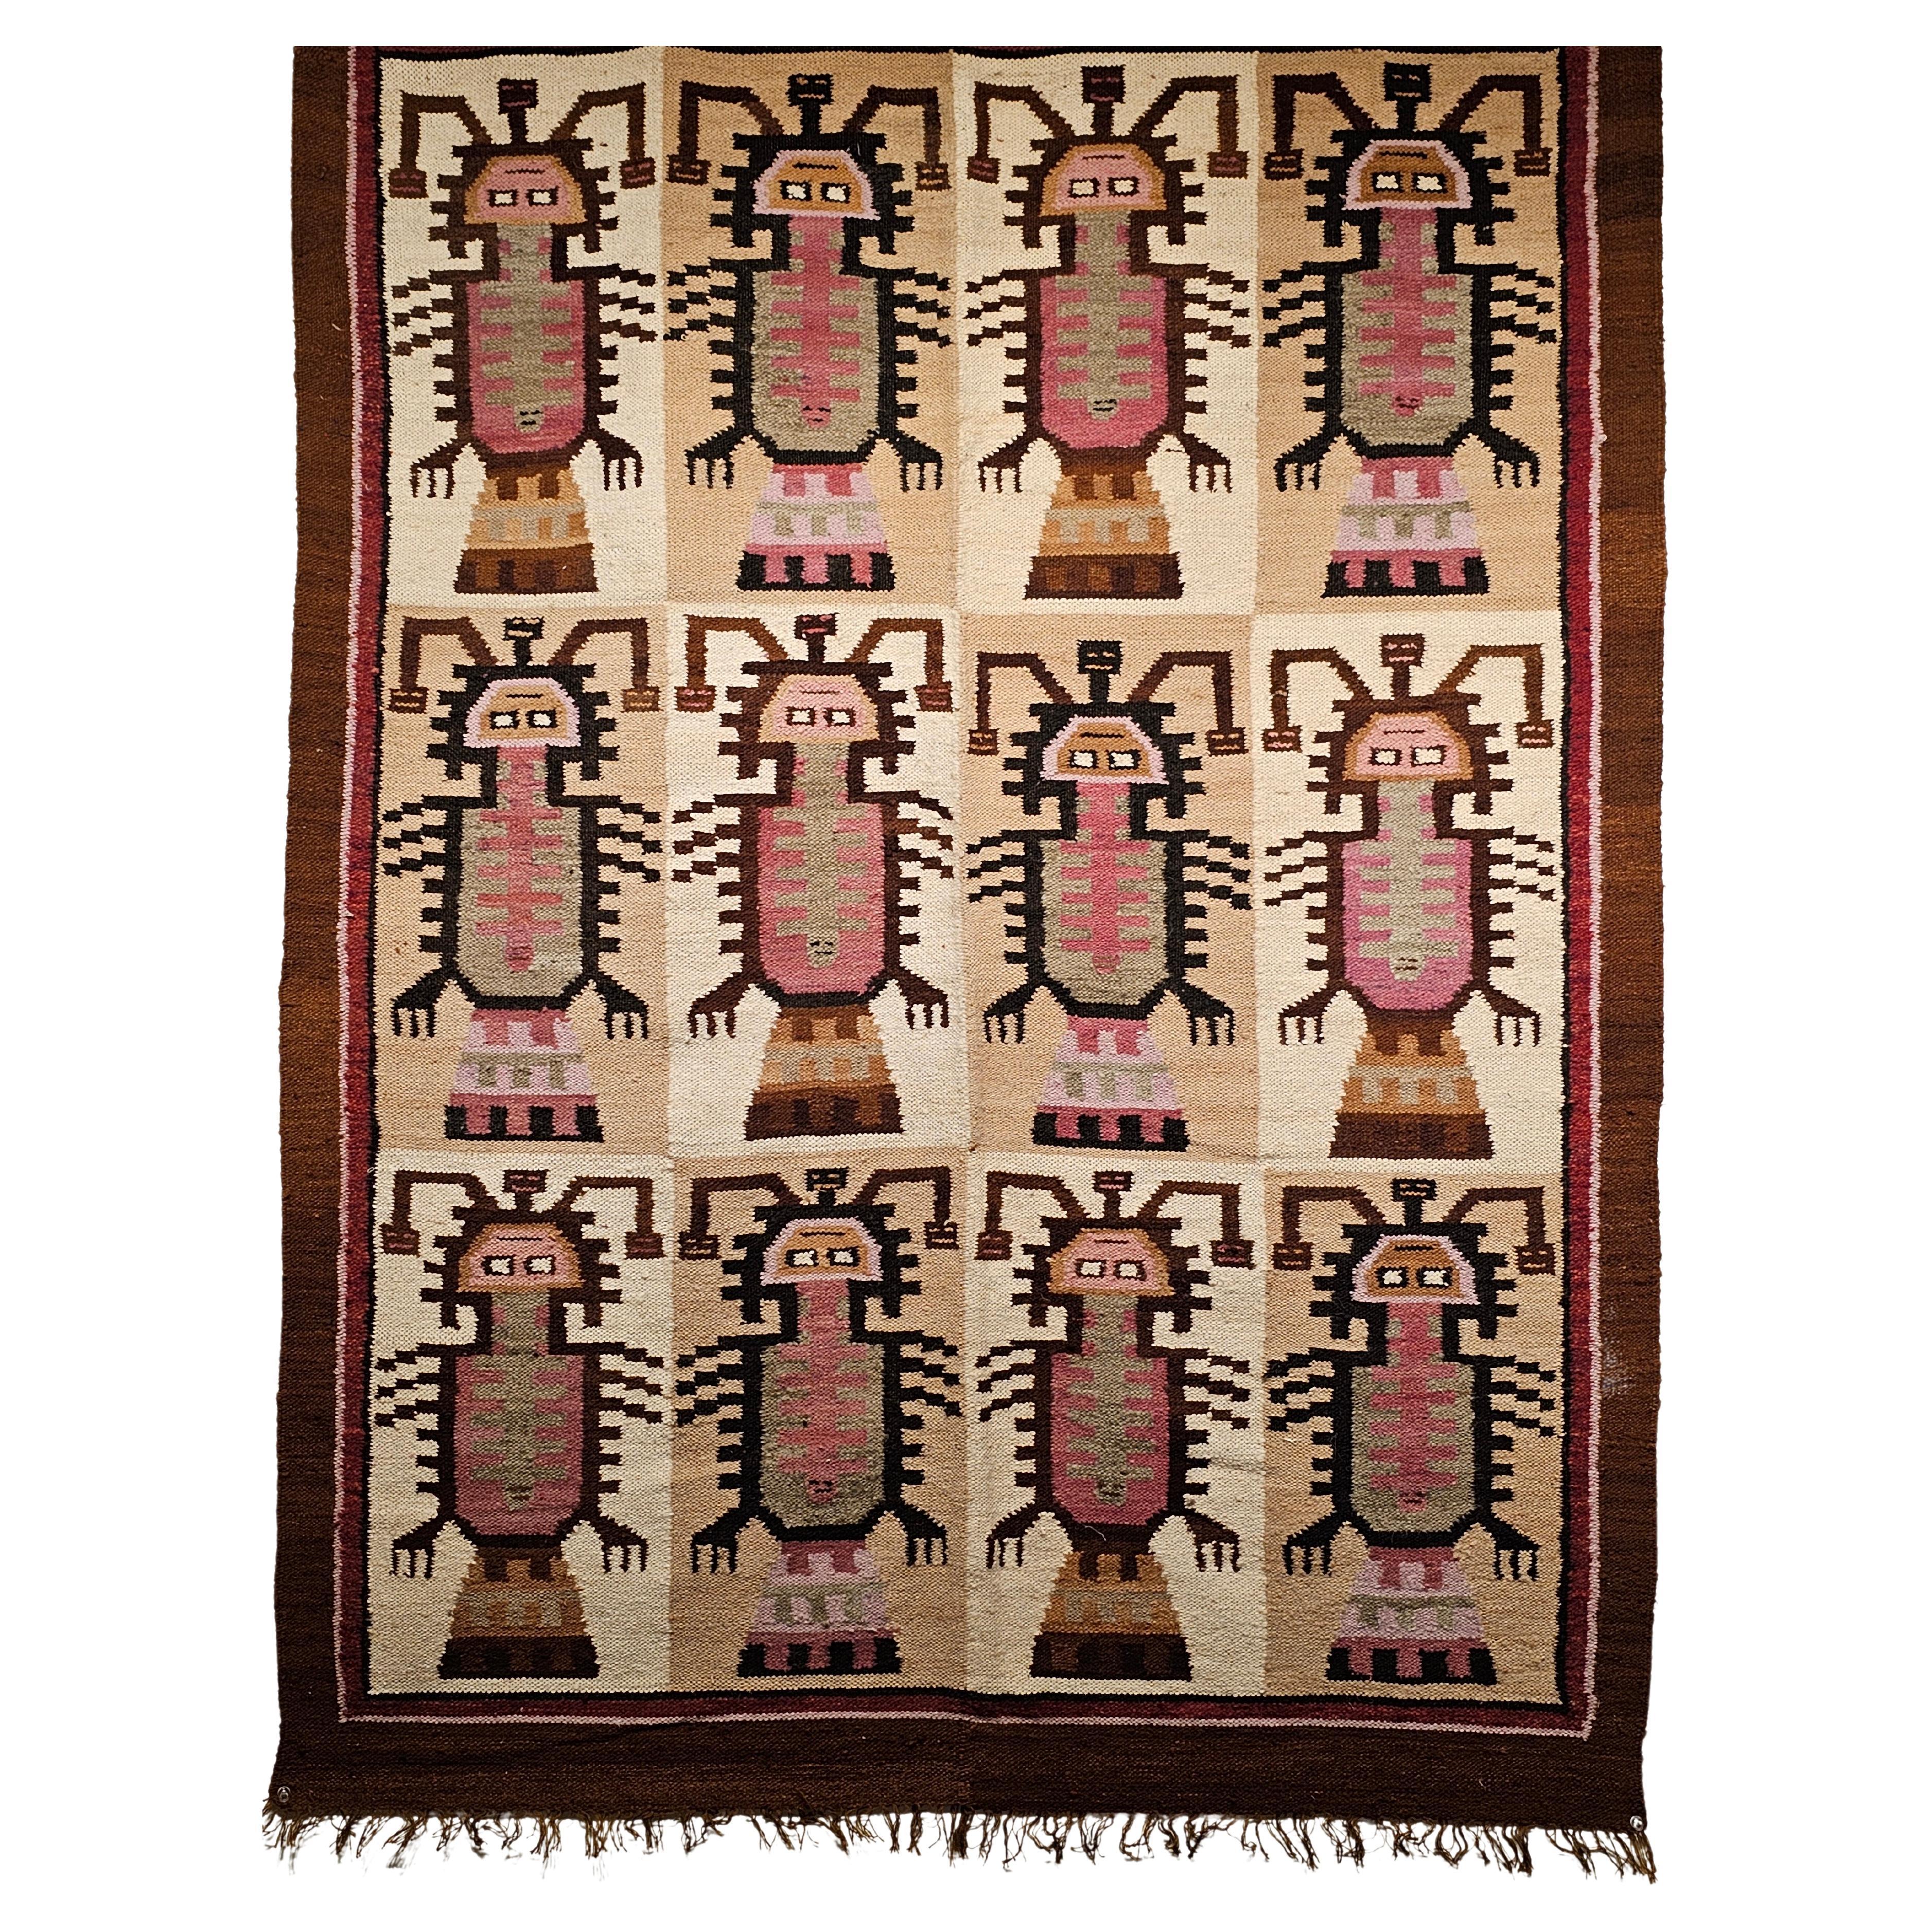 Vintage South American pictorial rug in deity forms pattern in ivory, brown, purple, and pink colors circa the 3rd quarter of the 1900s.  . The tapestry has a beautiful design of repeated deity forms in various pastel colors.  Although the figure